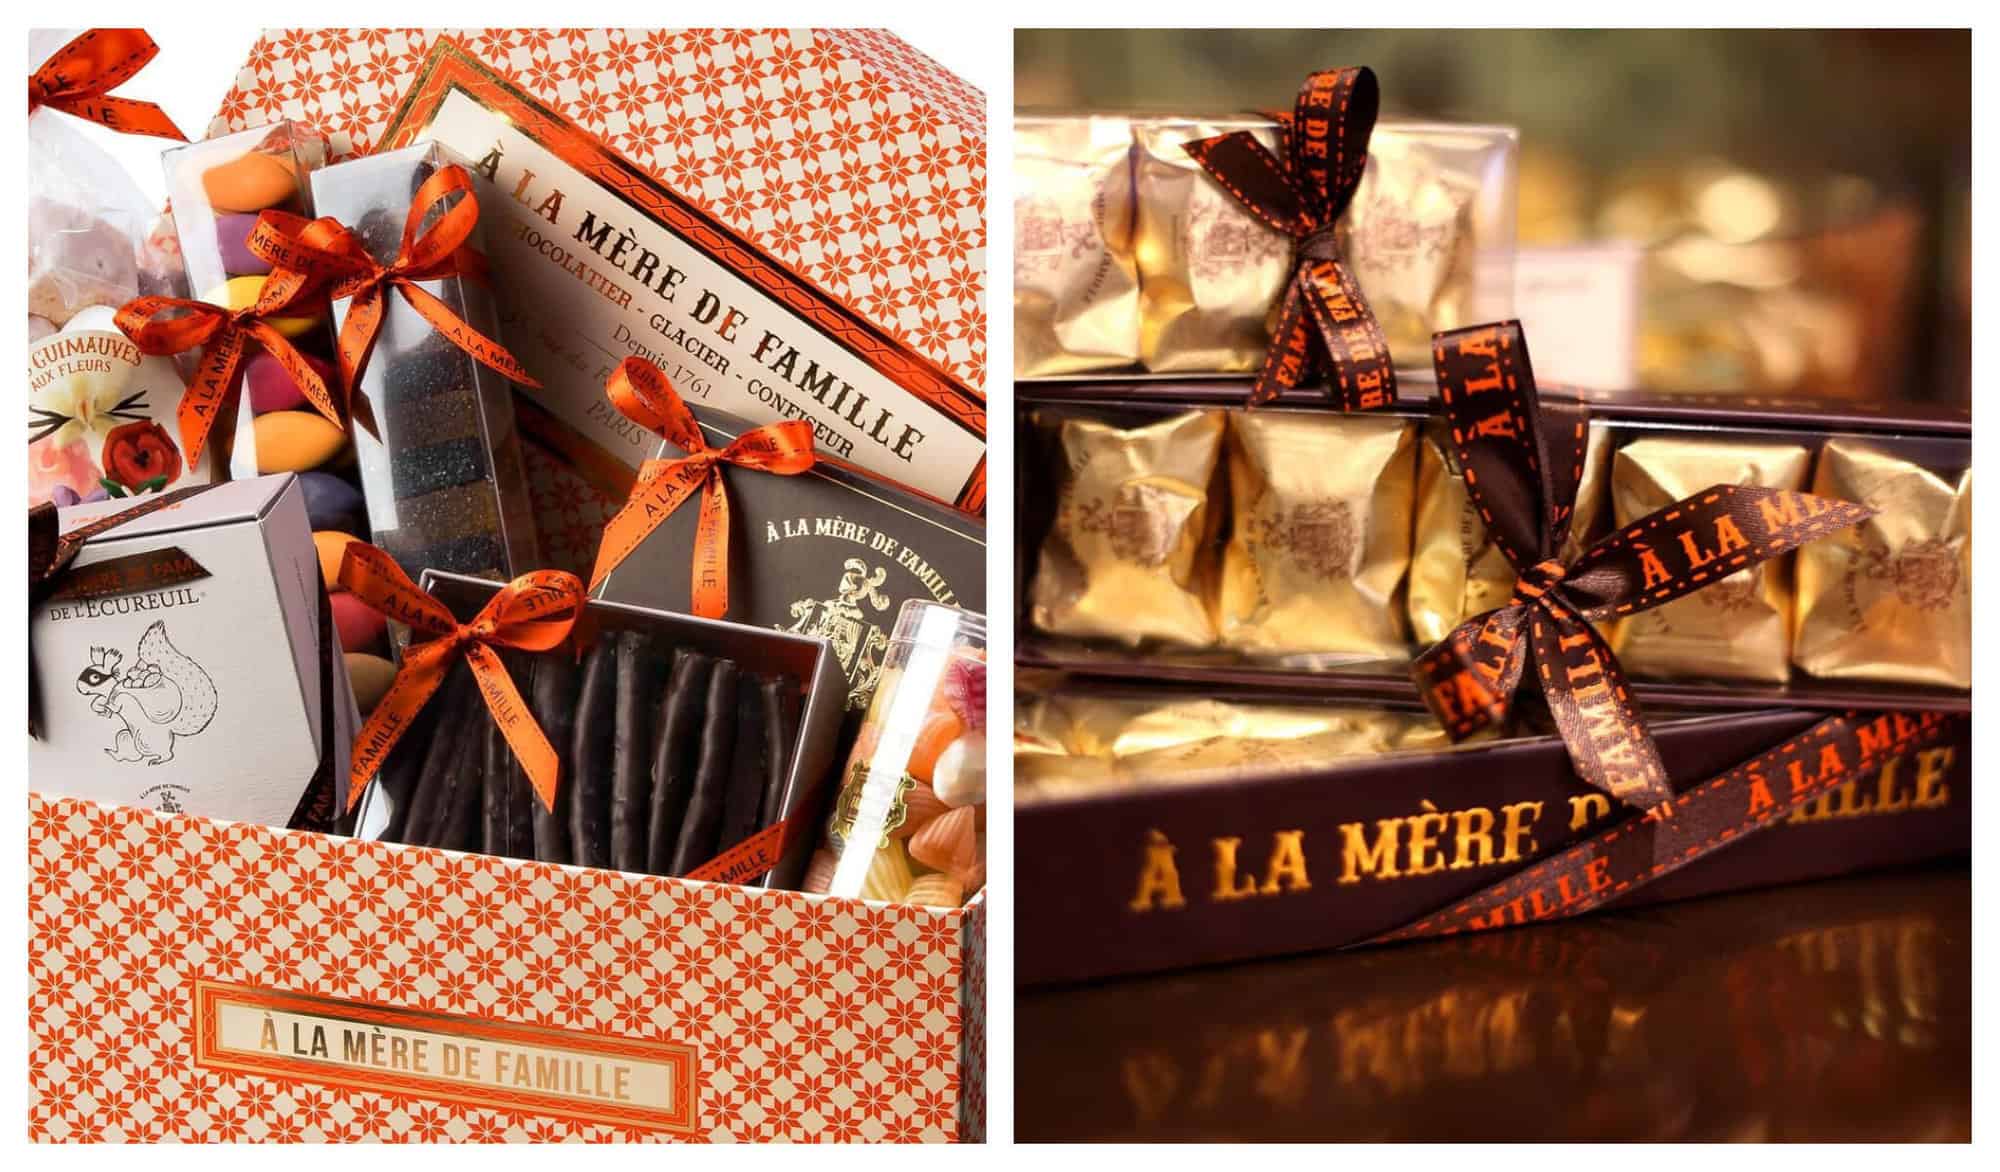 Left: An orange box full of pastries and sweets. Right: sets of chocolates in golden wrappers with brown ribbons.